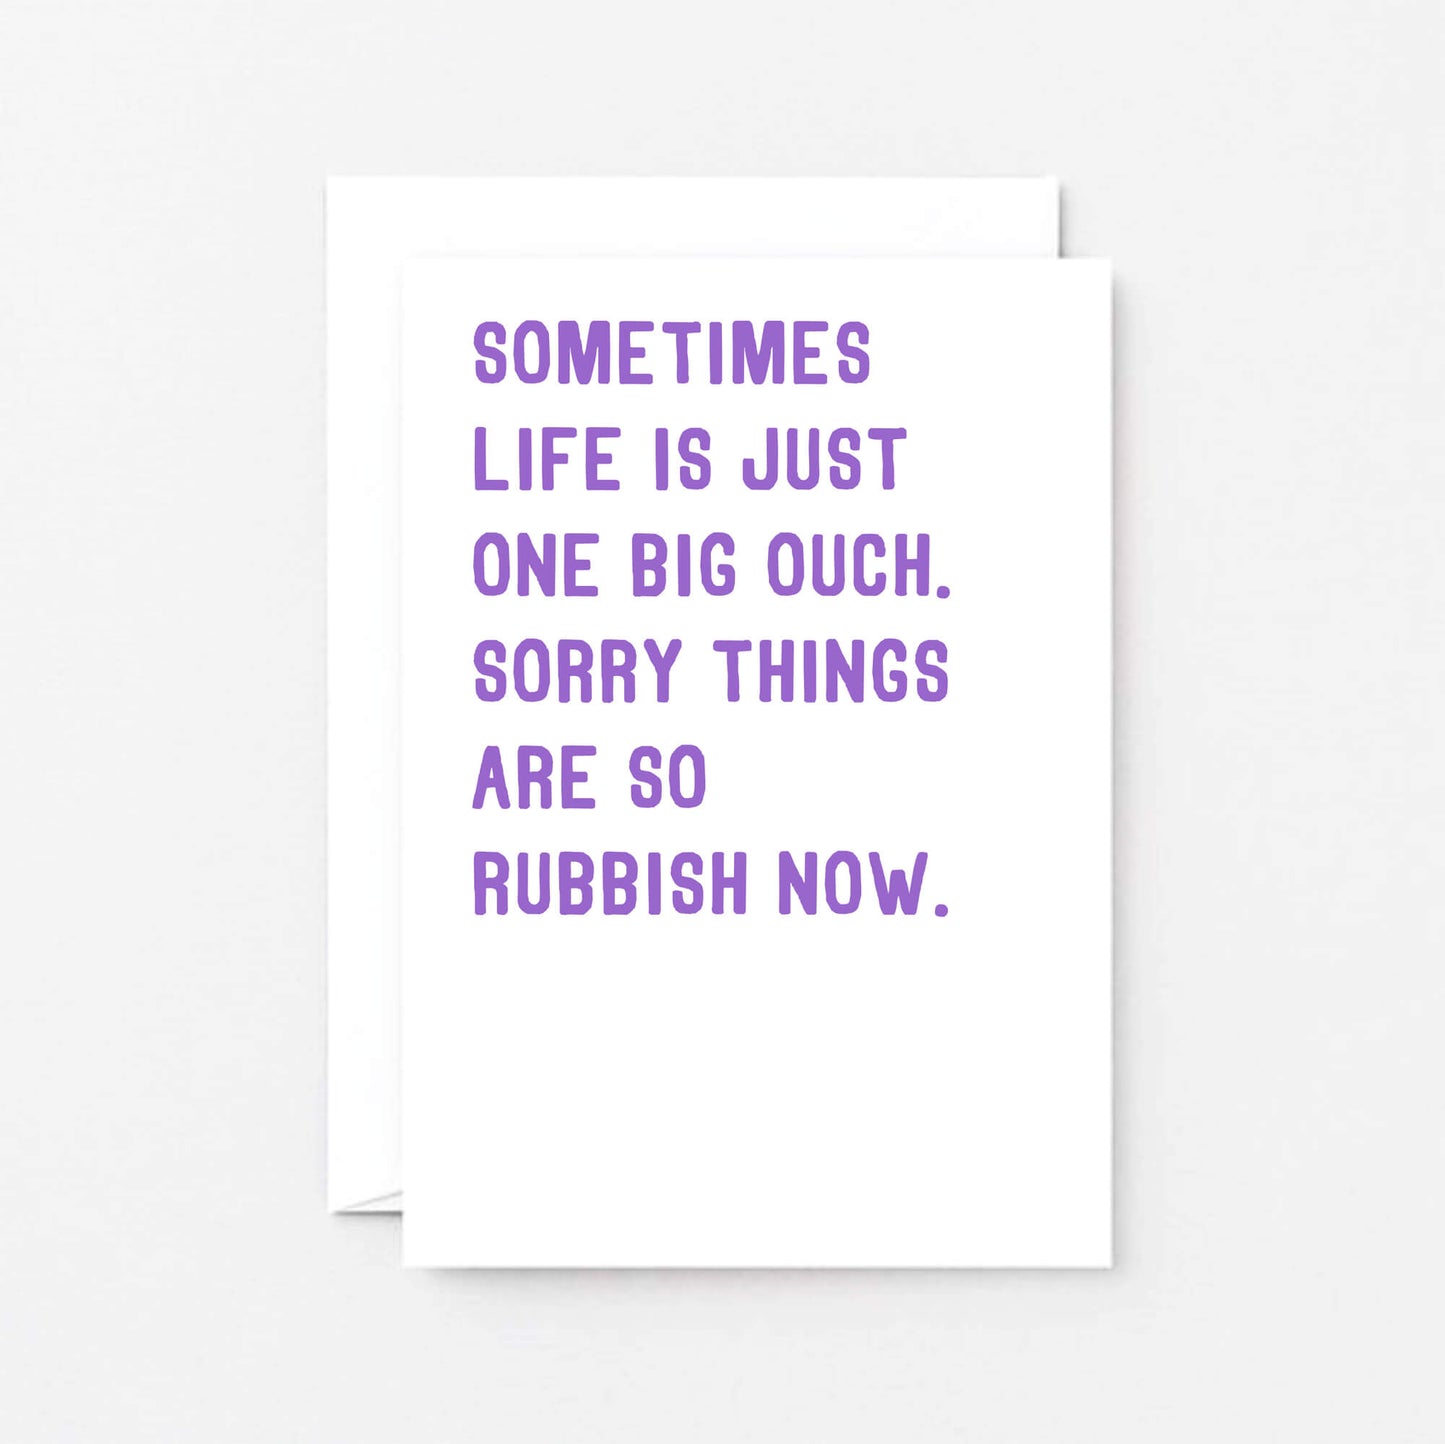 Thinking Of You Card by SixElevenCreations. Reads Sometimes life is just one big ouch. Sorry things are so rubbish now. Product Code SE2035A6